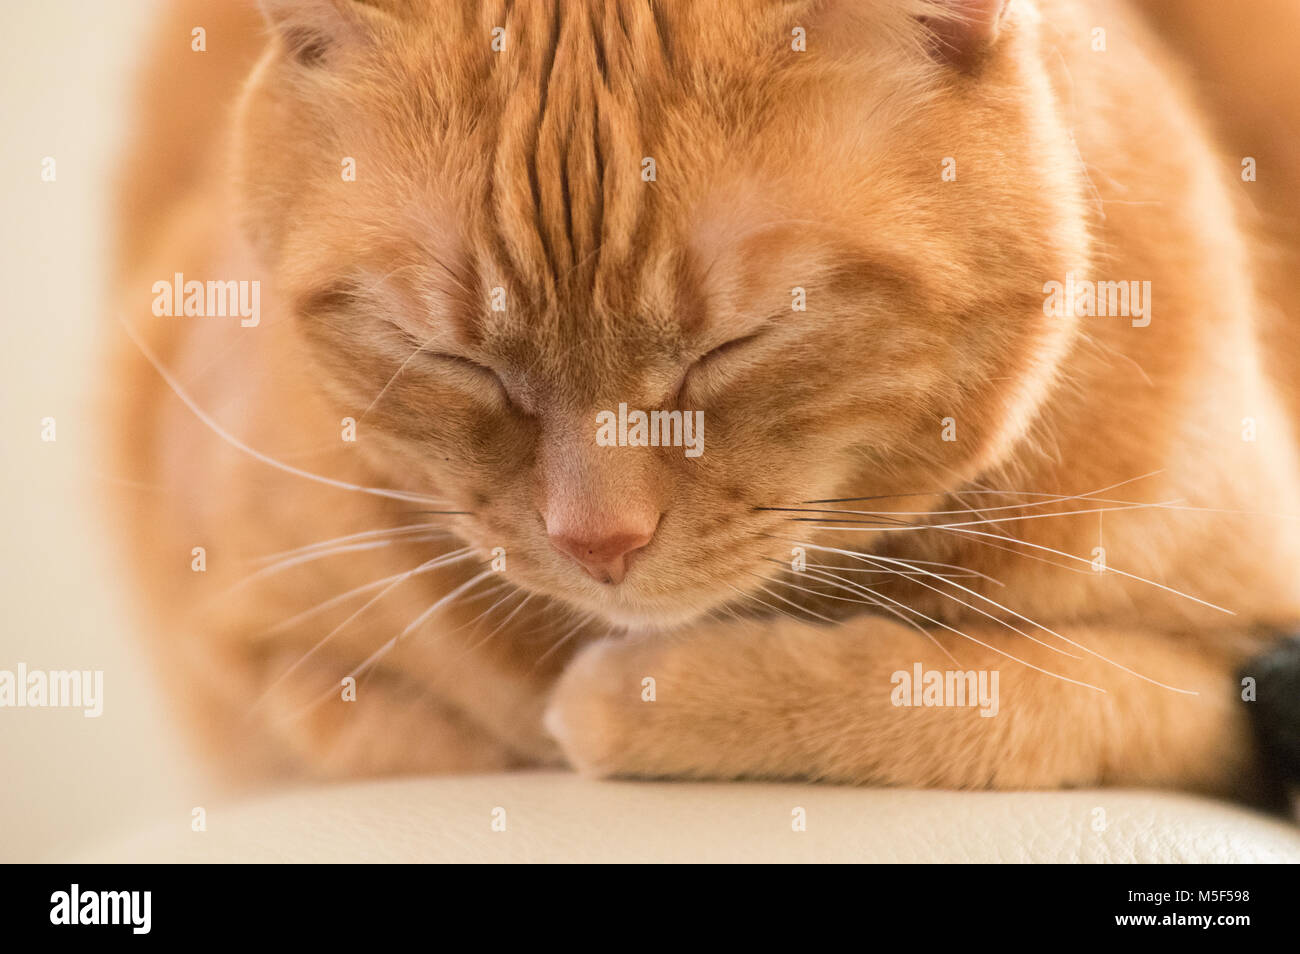 Frontal view closeup of face of orange tabby cat with eyes closed Stock Photo